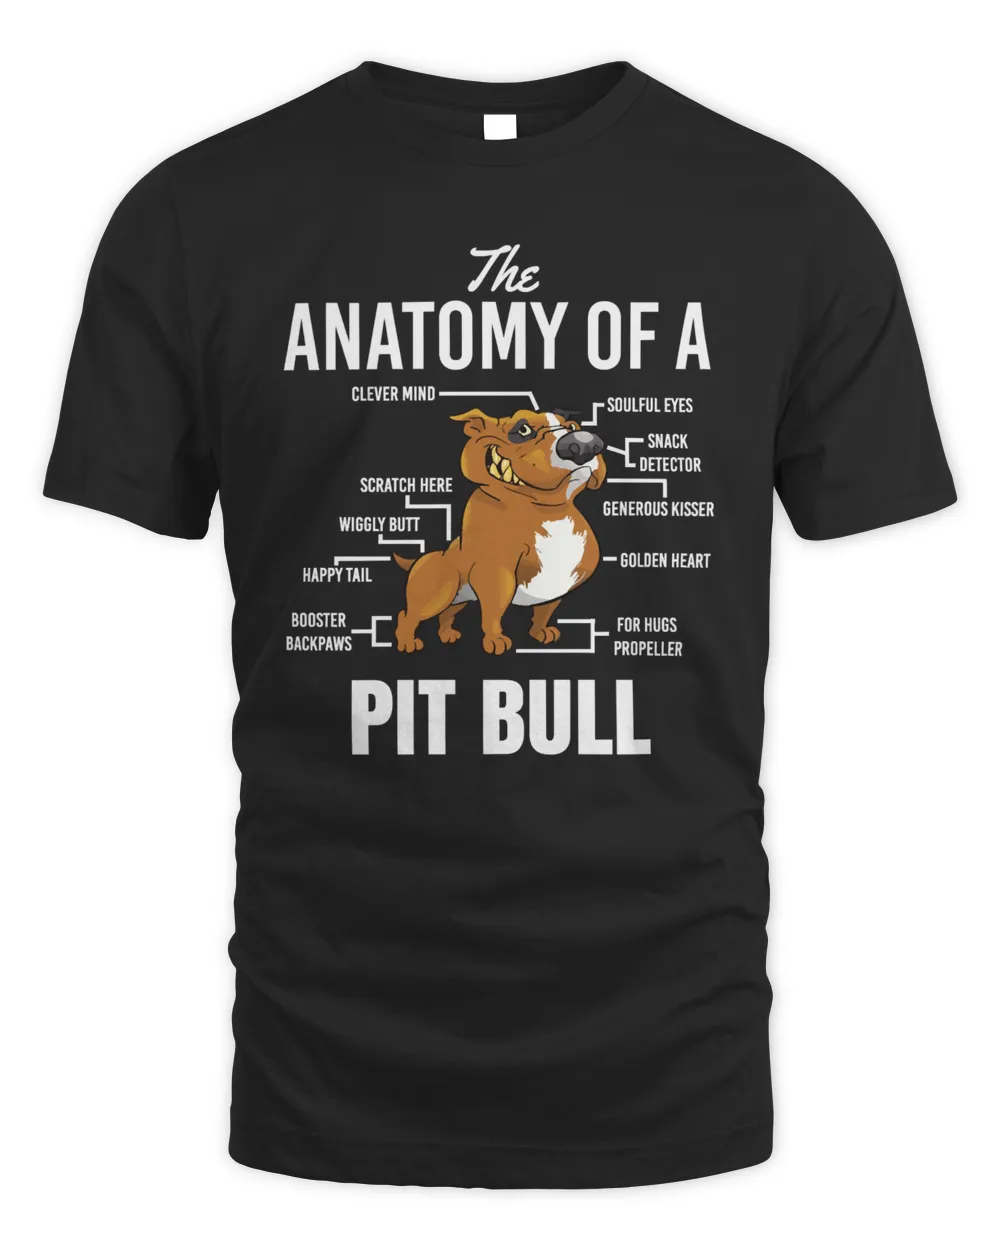 Dog Anatomy Of A Pit Bull Funny s For Pitbull Dog Pet Lovers Owners Enthusiasts 66 paws